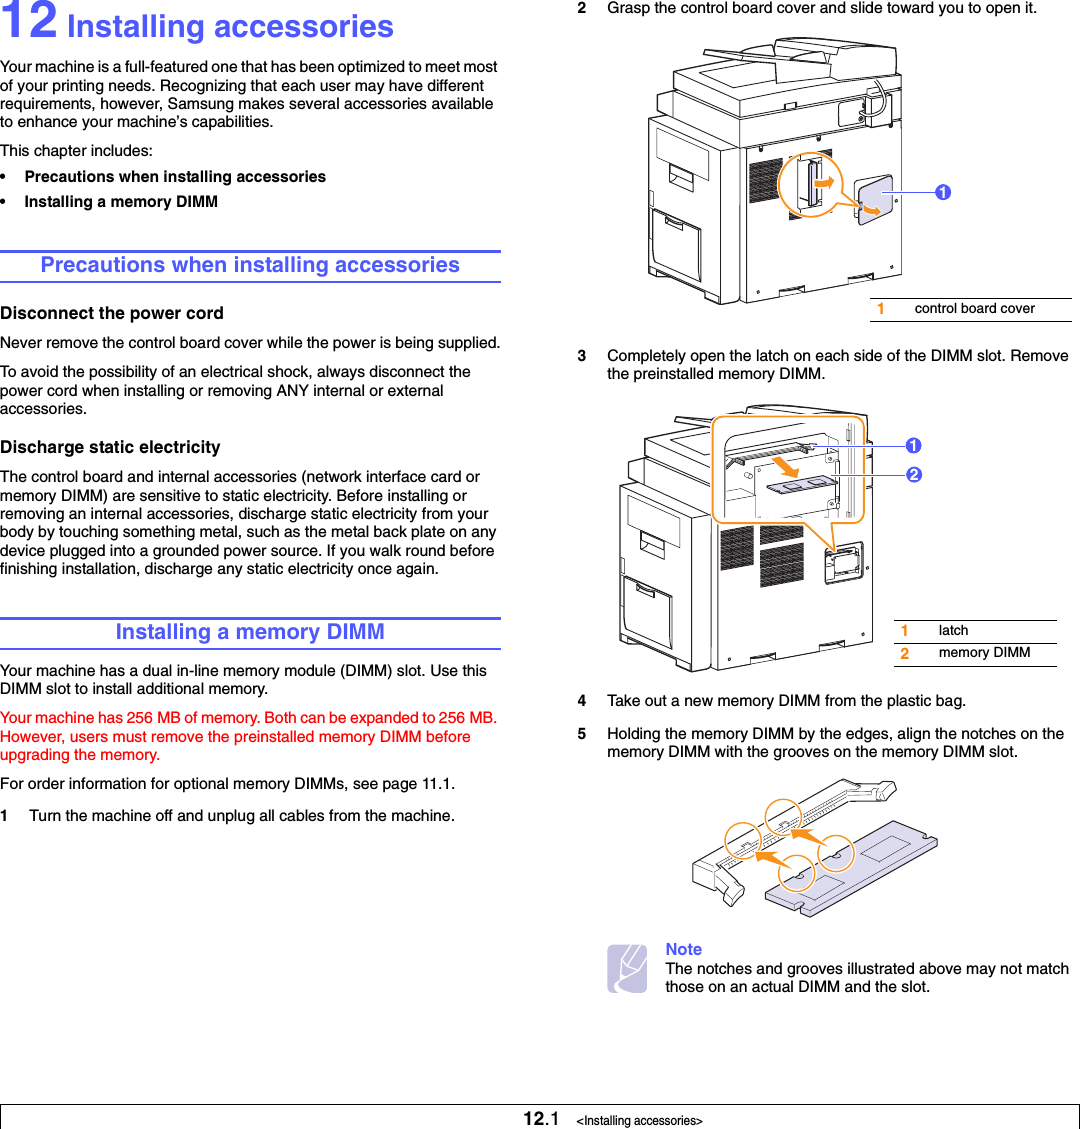 12.1   &lt;Installing accessories&gt;12 Installing accessoriesYour machine is a full-featured one that has been optimized to meet most of your printing needs. Recognizing that each user may have different requirements, however, Samsung makes several accessories available to enhance your machine’s capabilities.This chapter includes:• Precautions when installing accessories• Installing a memory DIMMPrecautions when installing accessoriesDisconnect the power cordNever remove the control board cover while the power is being supplied.To avoid the possibility of an electrical shock, always disconnect the power cord when installing or removing ANY internal or external accessories.Discharge static electricityThe control board and internal accessories (network interface card or memory DIMM) are sensitive to static electricity. Before installing or removing an internal accessories, discharge static electricity from your body by touching something metal, such as the metal back plate on any device plugged into a grounded power source. If you walk round before finishing installation, discharge any static electricity once again.Installing a memory DIMMYour machine has a dual in-line memory module (DIMM) slot. Use this DIMM slot to install additional memory.Your machine has 256 MB of memory. Both can be expanded to 256 MB. However, users must remove the preinstalled memory DIMM before upgrading the memory. For order information for optional memory DIMMs, see page 11.1.1Turn the machine off and unplug all cables from the machine.2Grasp the control board cover and slide toward you to open it.3Completely open the latch on each side of the DIMM slot. Remove the preinstalled memory DIMM.4Take out a new memory DIMM from the plastic bag.5Holding the memory DIMM by the edges, align the notches on the memory DIMM with the grooves on the memory DIMM slot.NoteThe notches and grooves illustrated above may not match those on an actual DIMM and the slot.1control board cover11latch2memory DIMM12